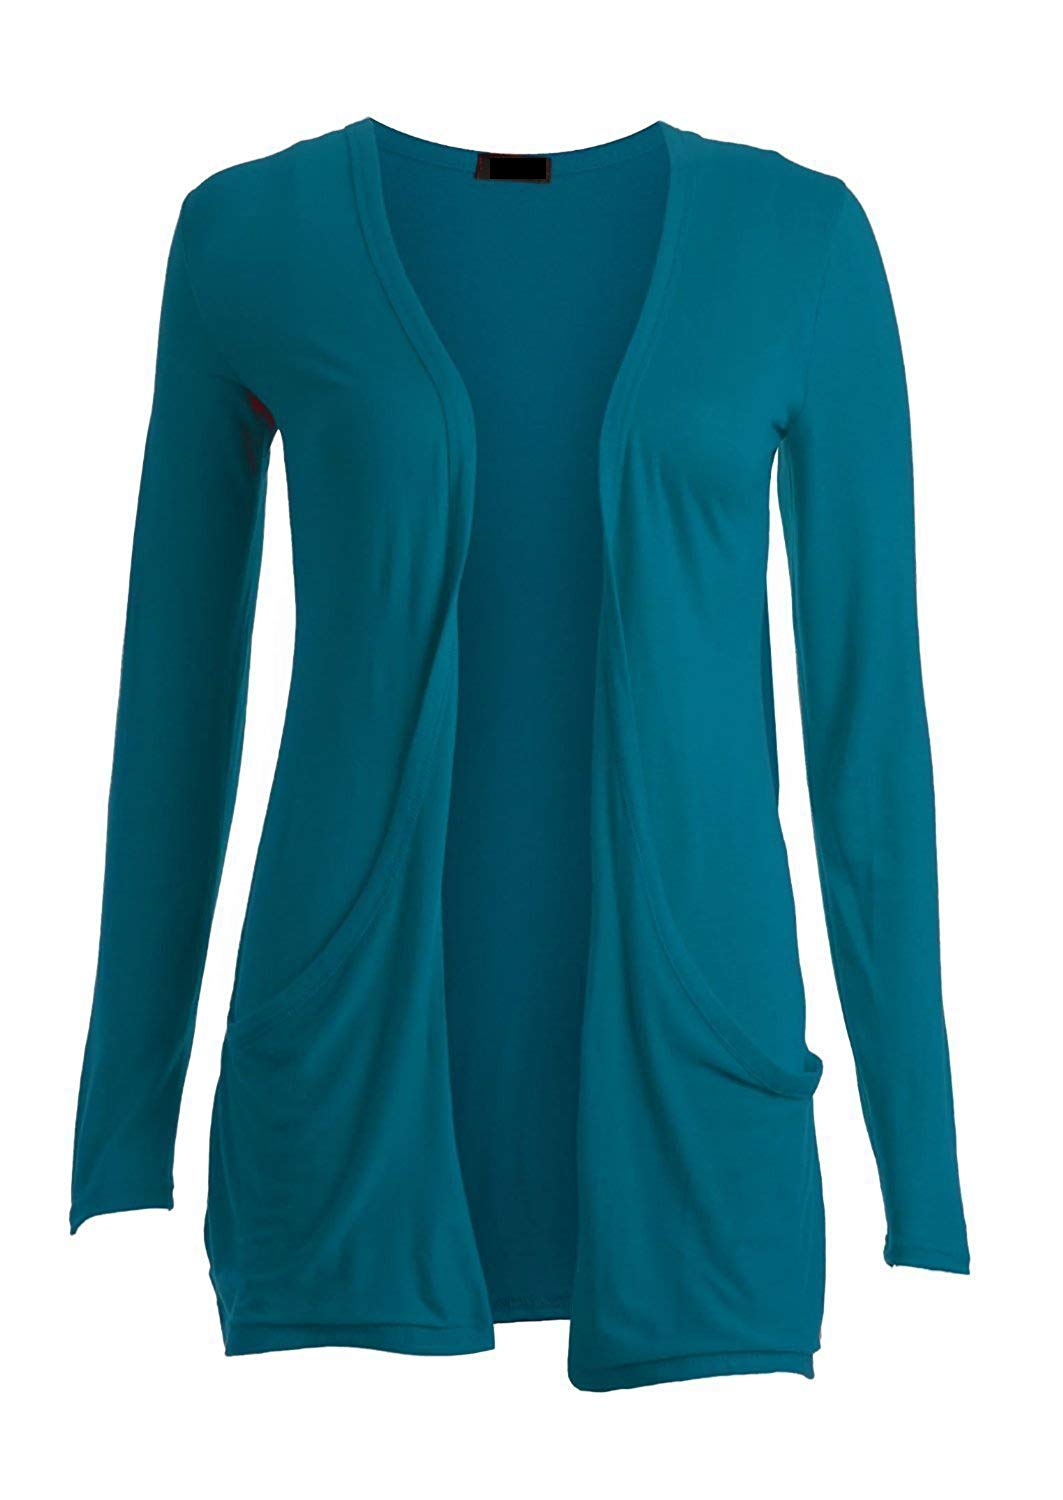 Cardigans for women ladies women boyfriend open cardigan with pockets long sleeve all sizes  teal xx-large at DISARCR